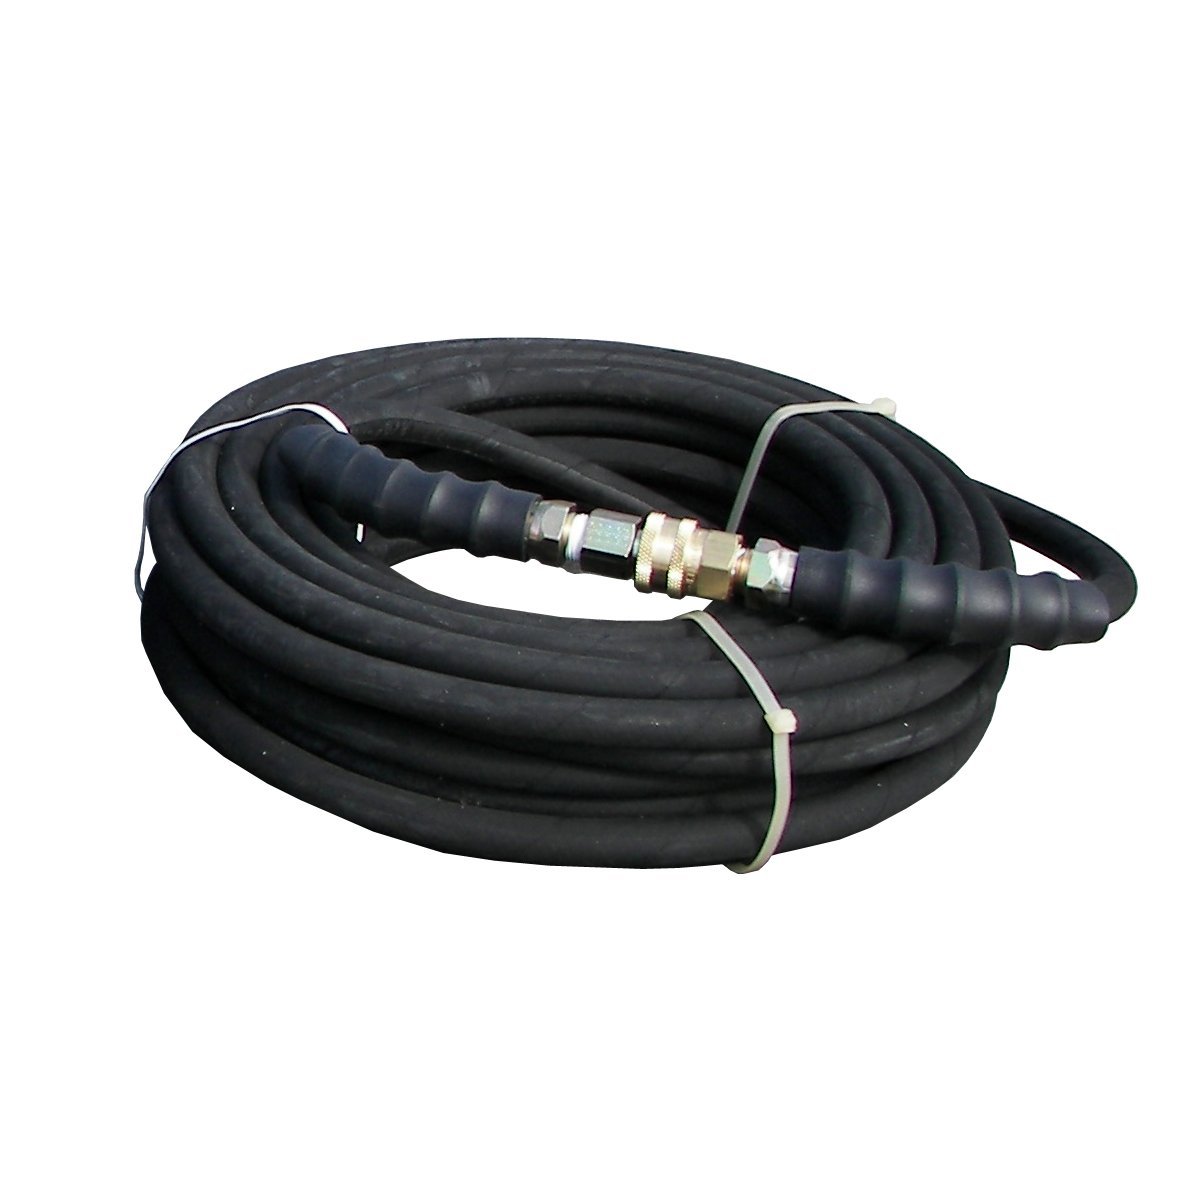 BE Pressure 85.238.153 Pressure Washer 1 Wire Hose 50 ft X 3/8 ID 4200 psi with QC Assembly